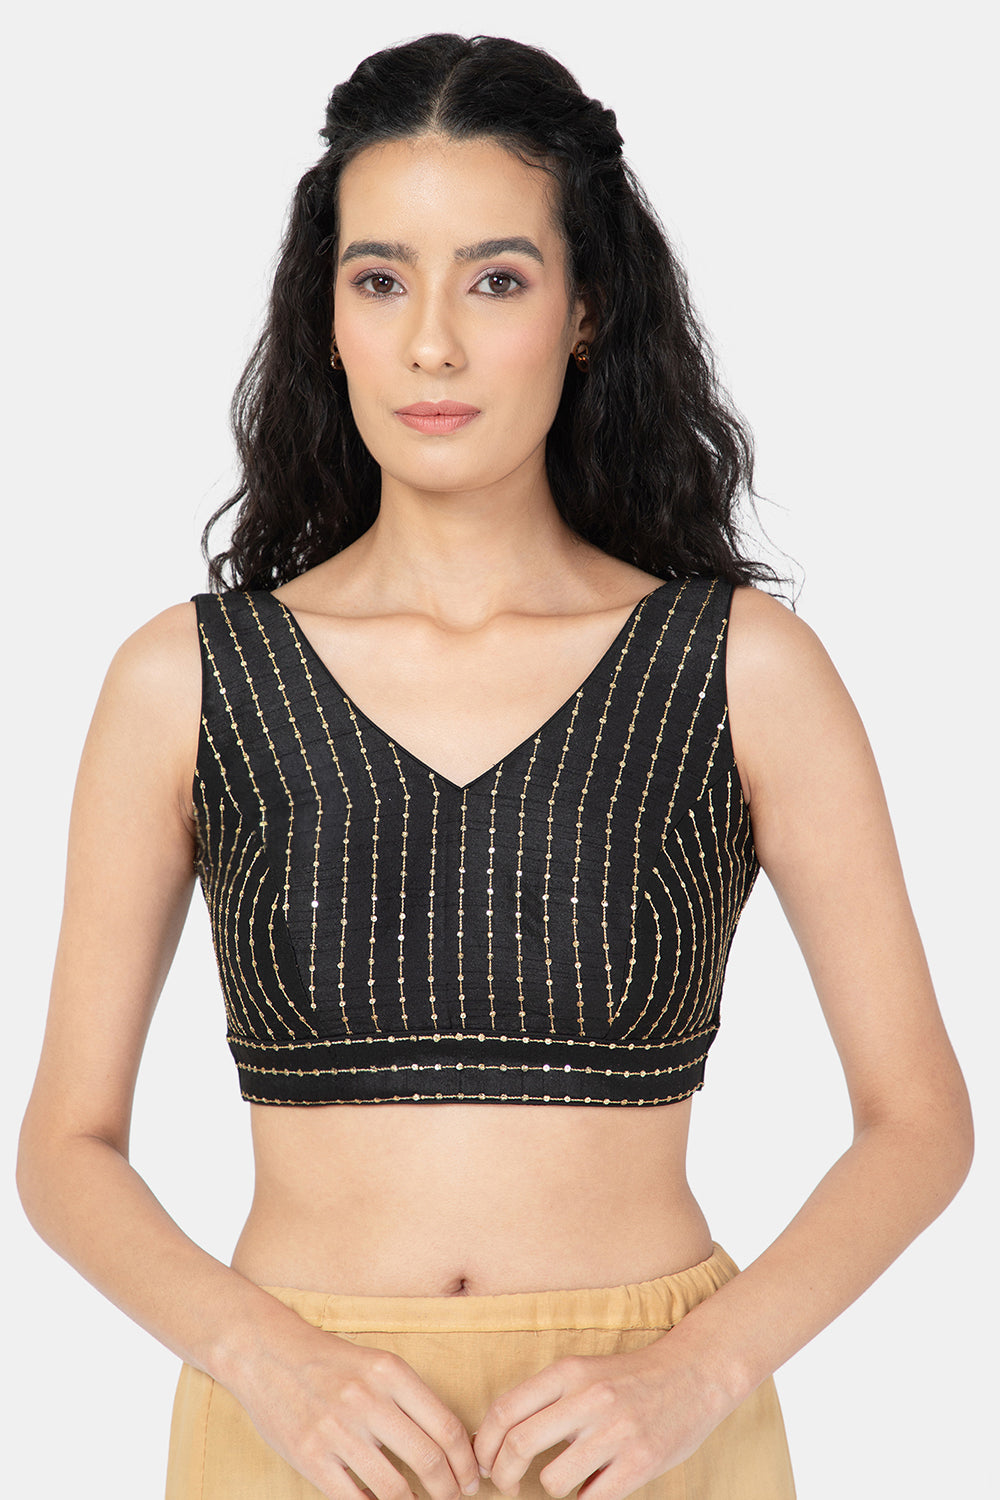 Buy MIXT by Nykaa Fashion Black Halter Neck Shimmer Crop Top Online